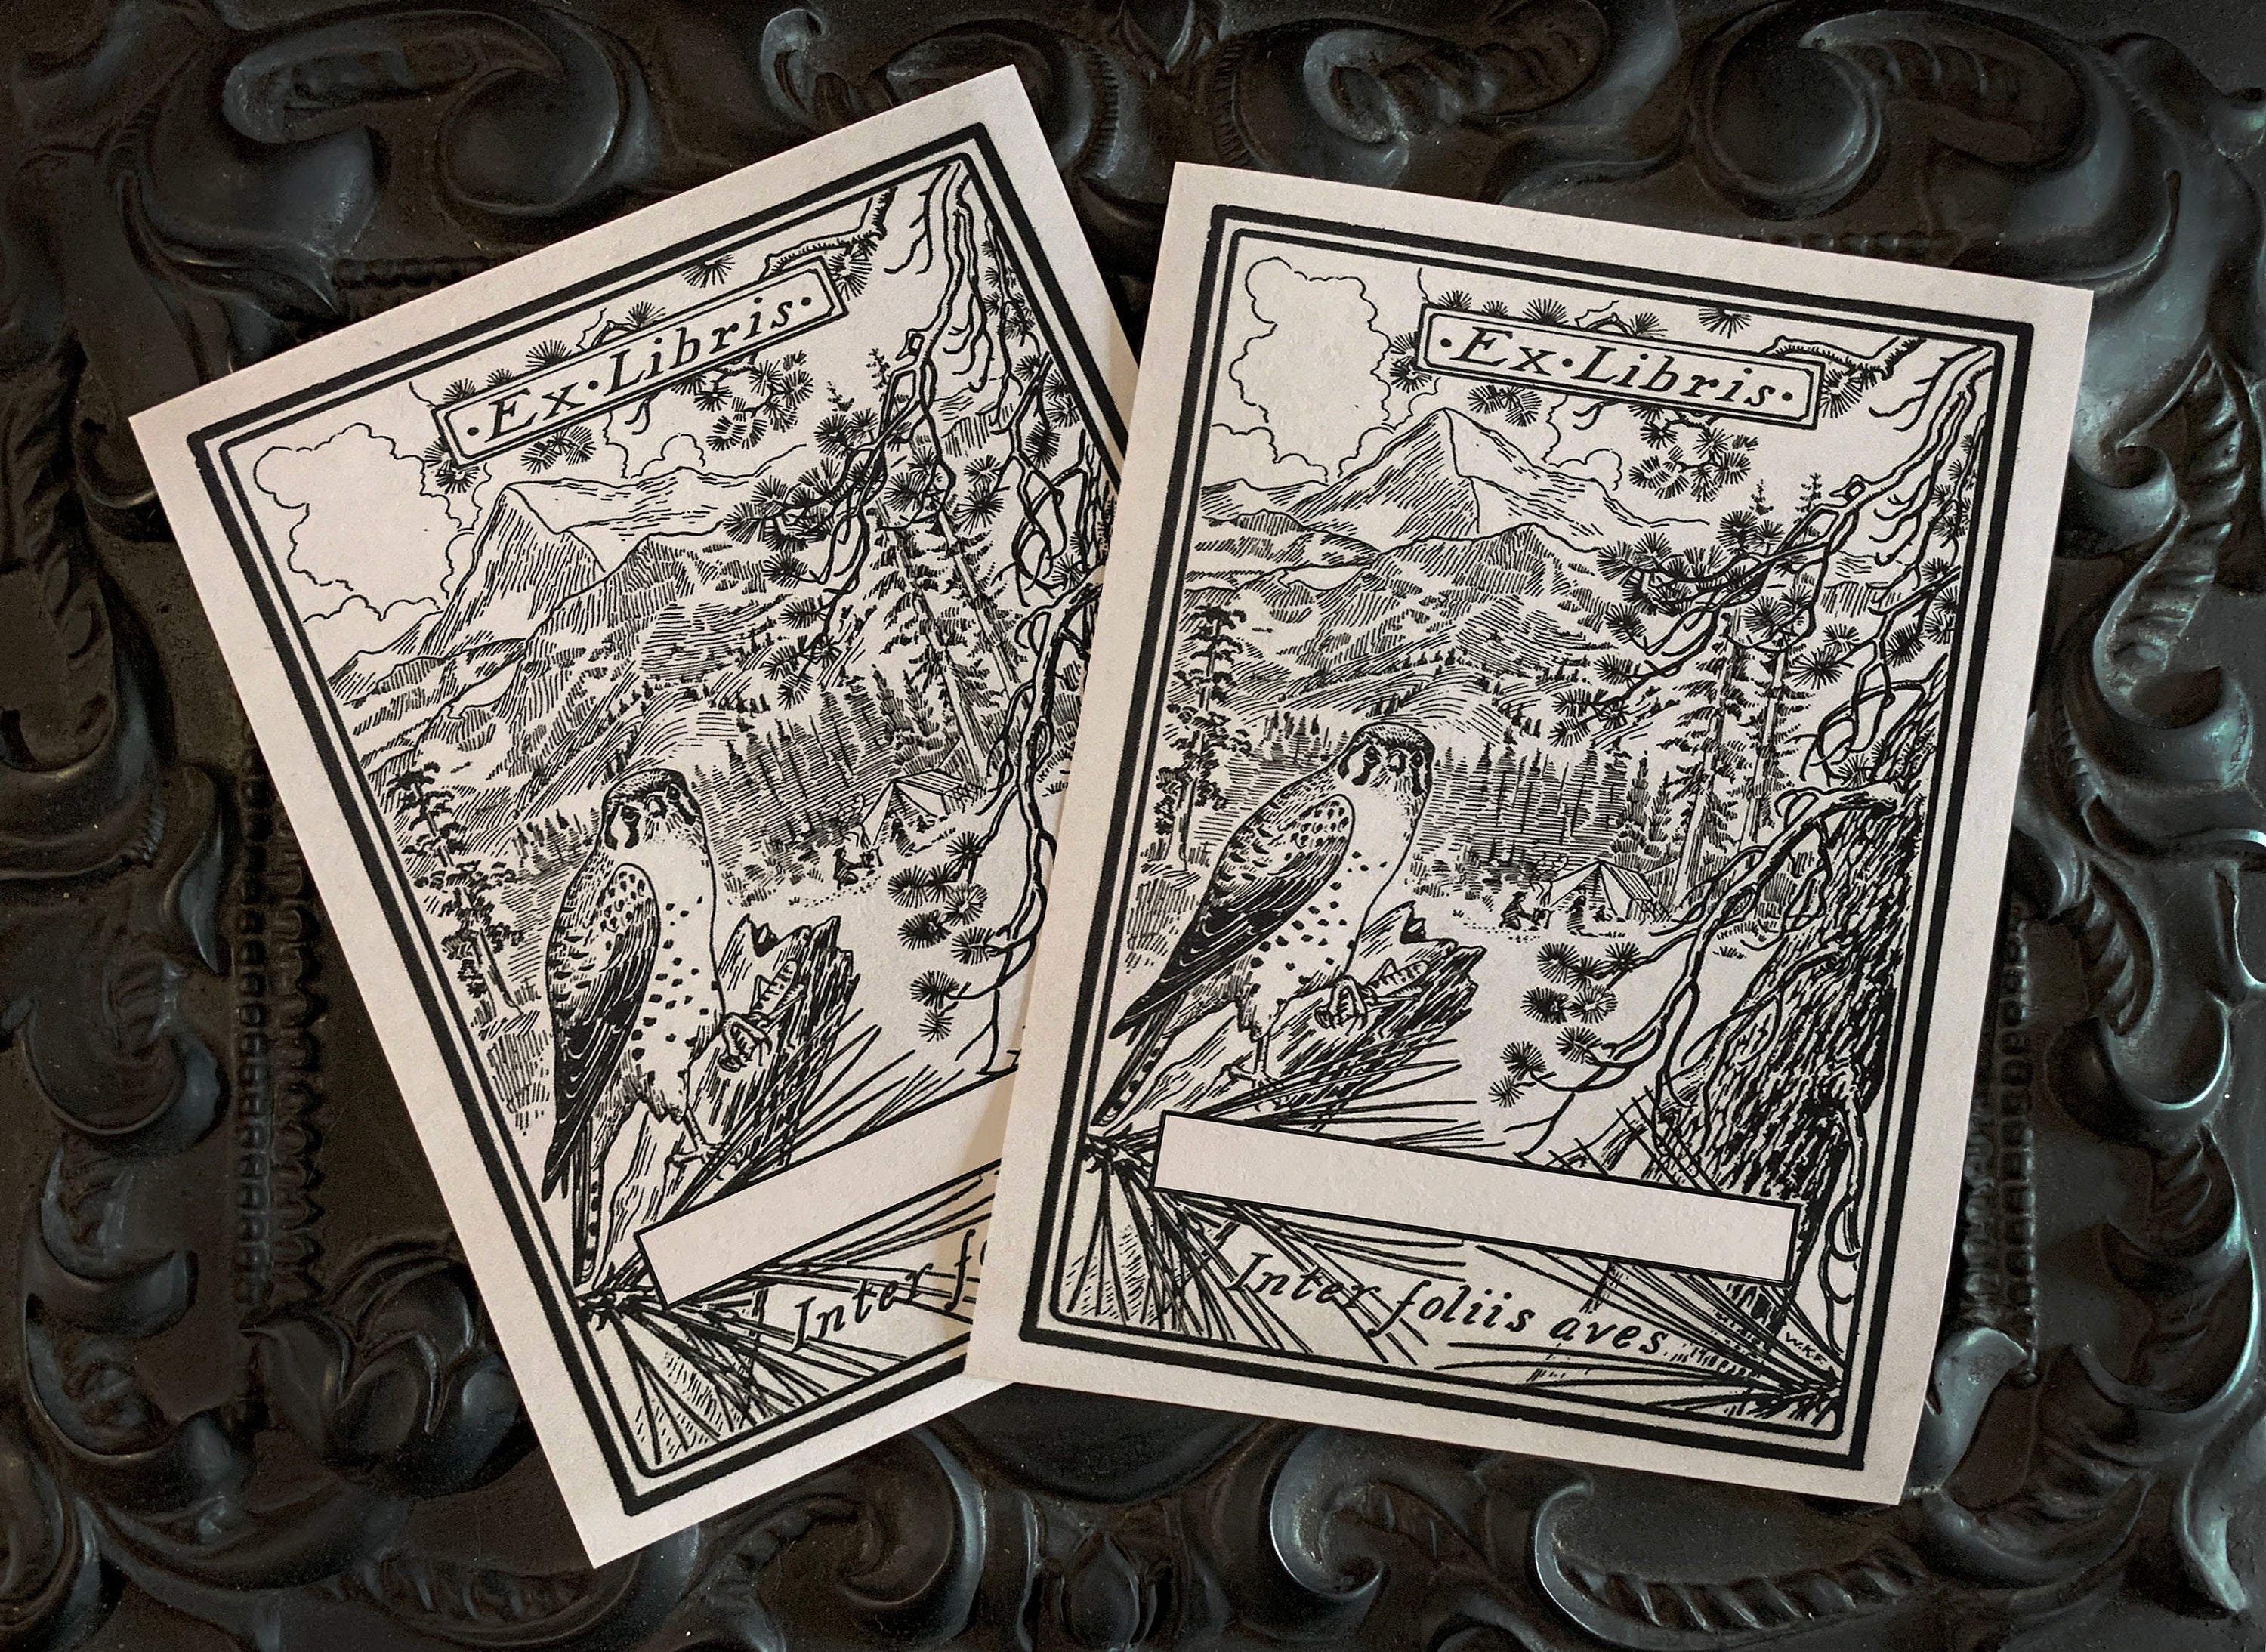 Regal Hawk, Personalized, Ex-Libris Bookplates, Crafted on Traditional Gummed Paper, 3in x 4in, Set of 30